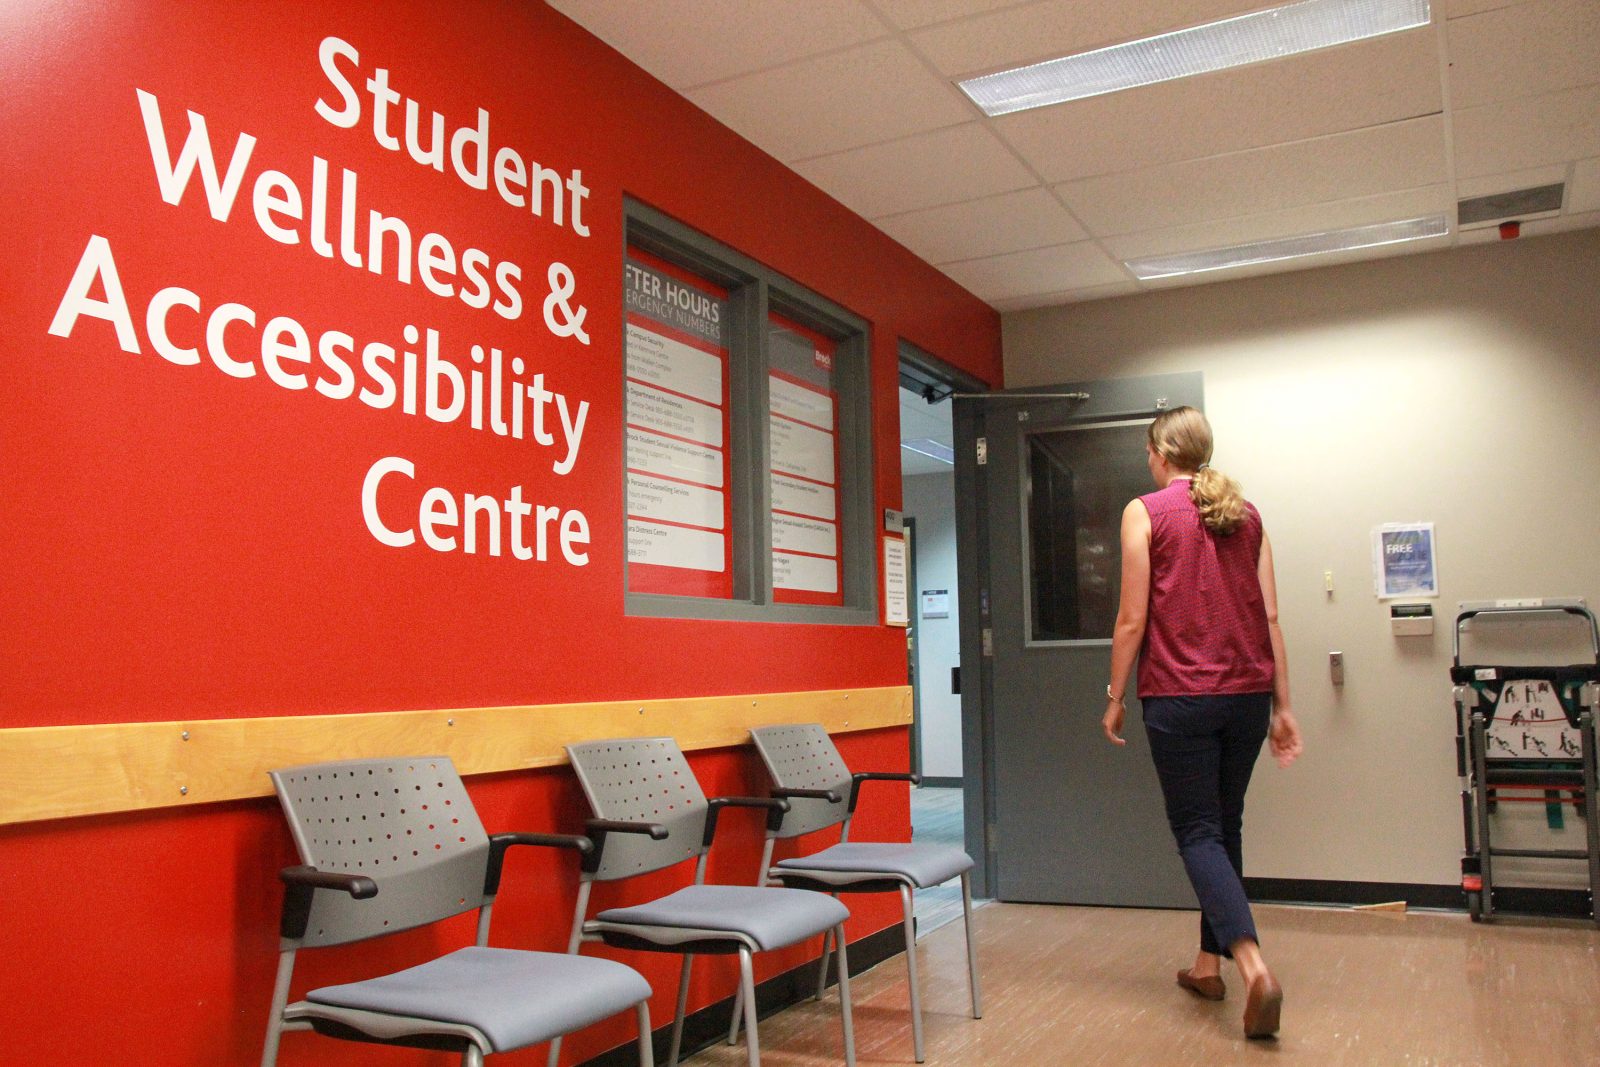 Student Wellness and Accessibility Centre